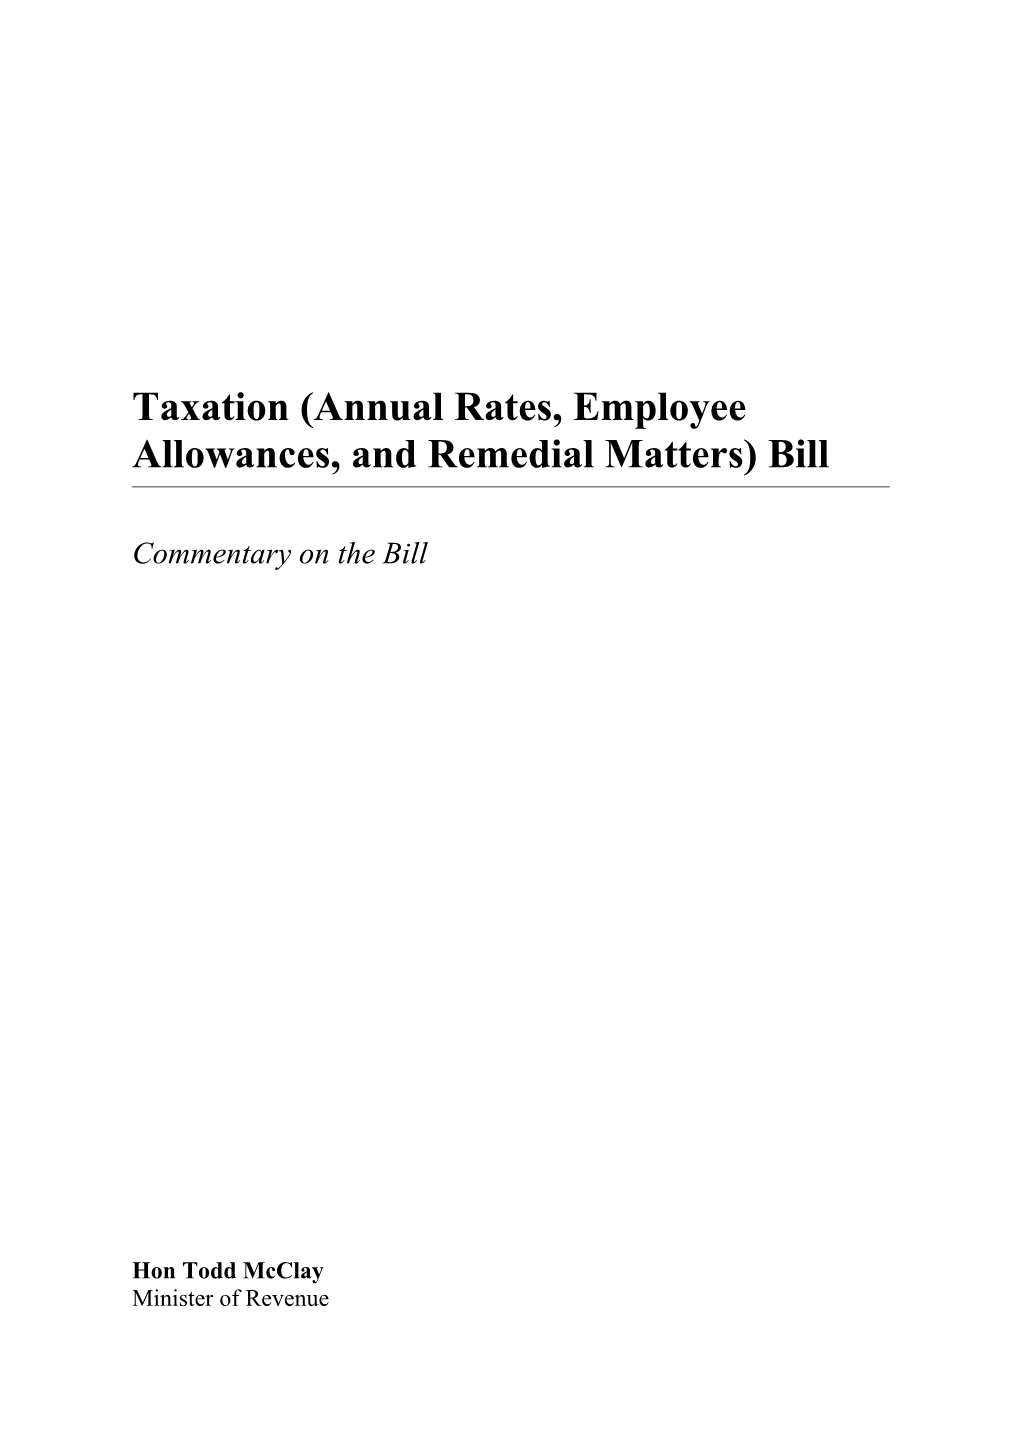 Taxation (Annual Rates, Employee Allowances, and Remedial Matters) Bill